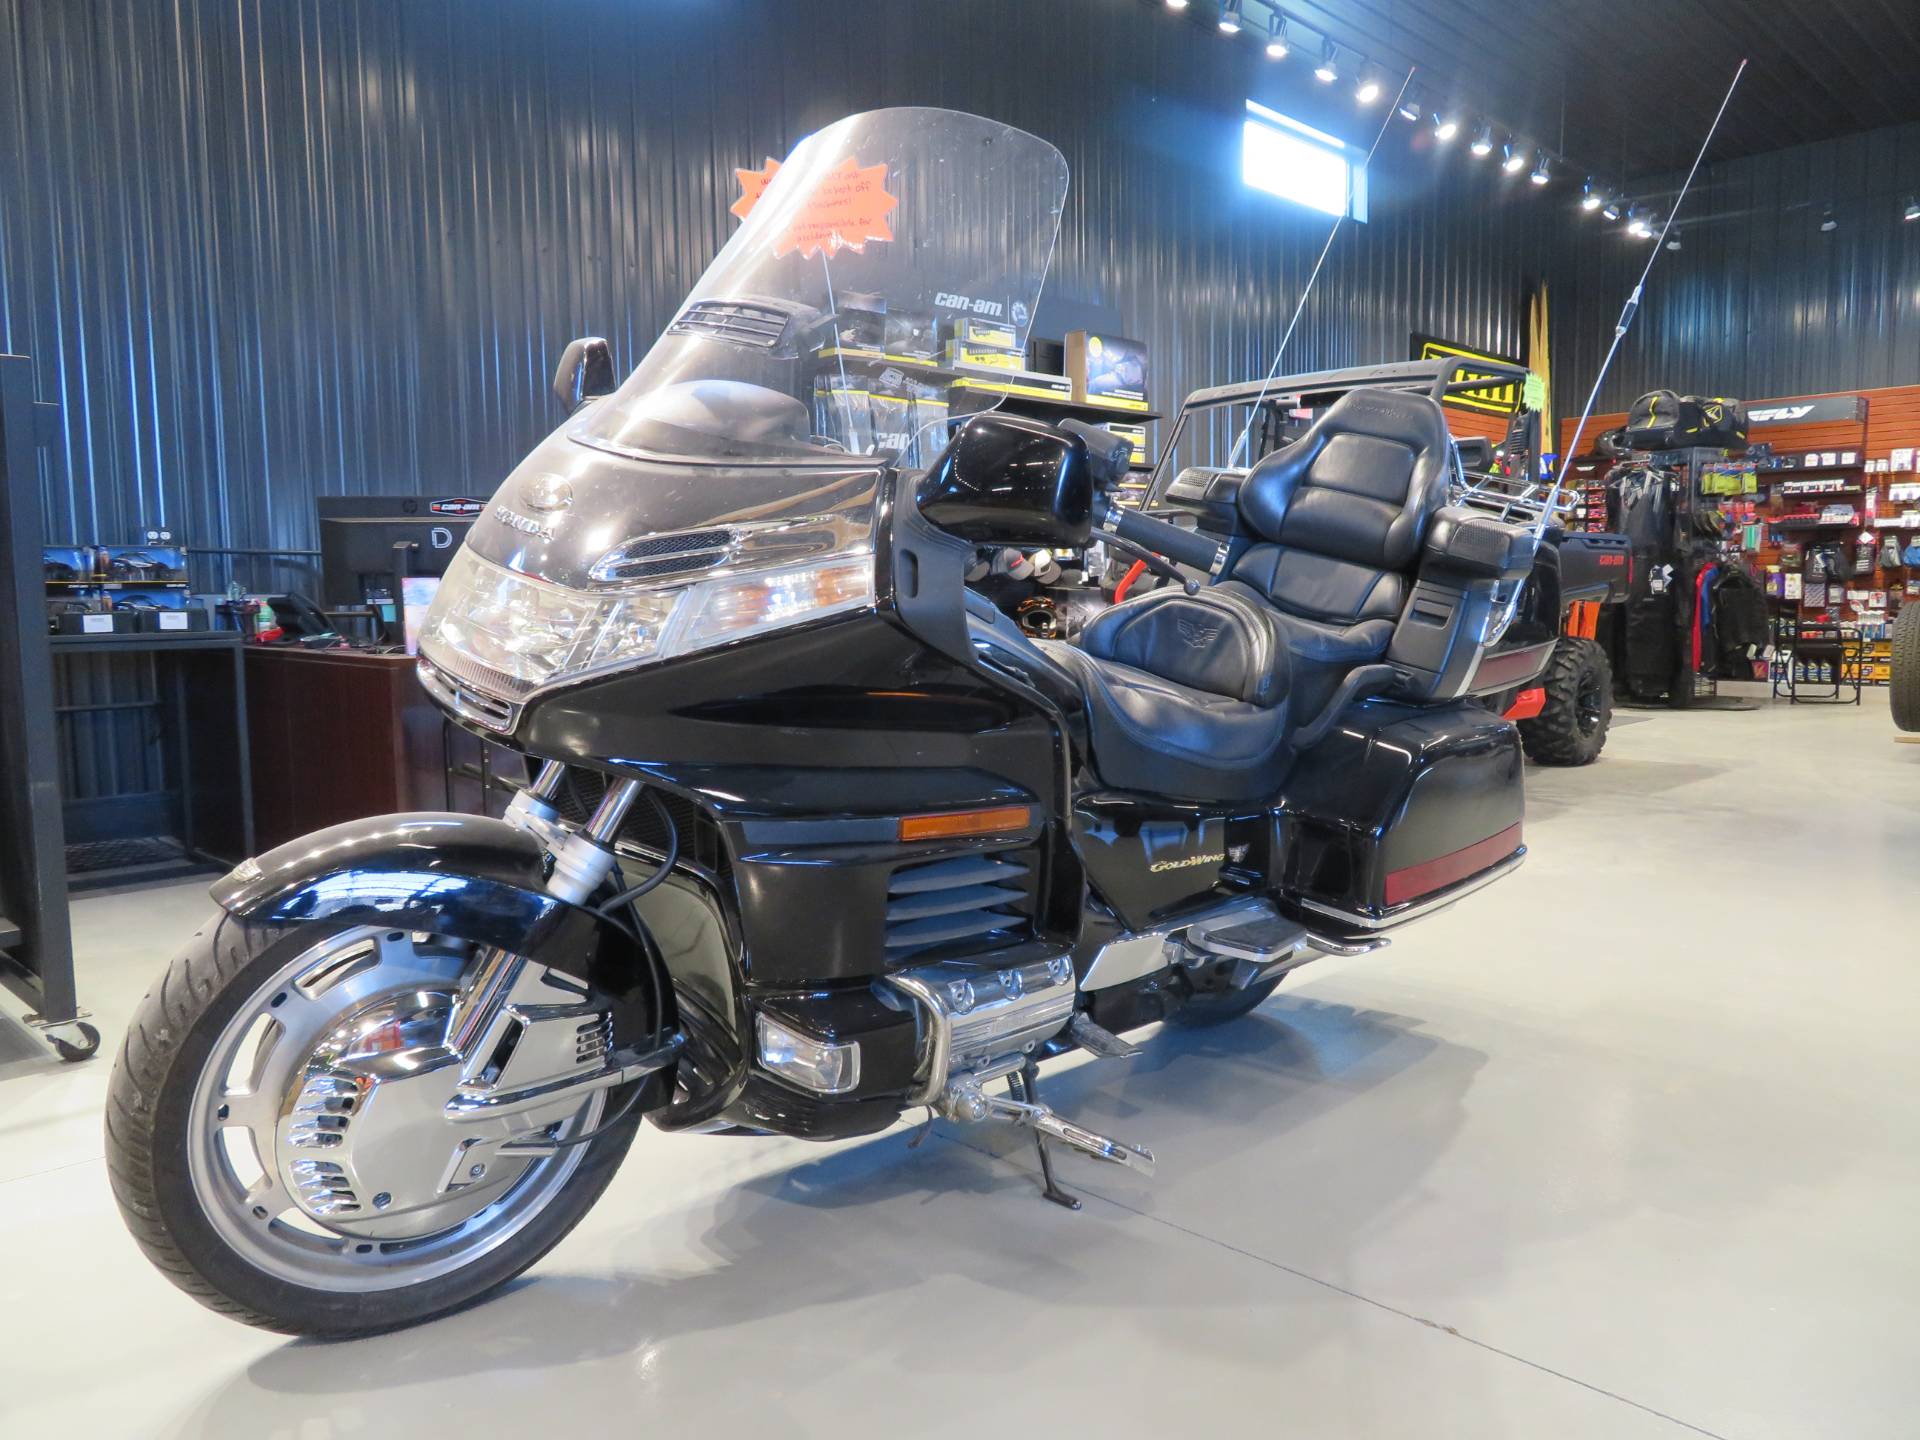 Used 2000 Honda Gold Wing Se Motorcycles In Dickinson Nd Stock Number Honda0021